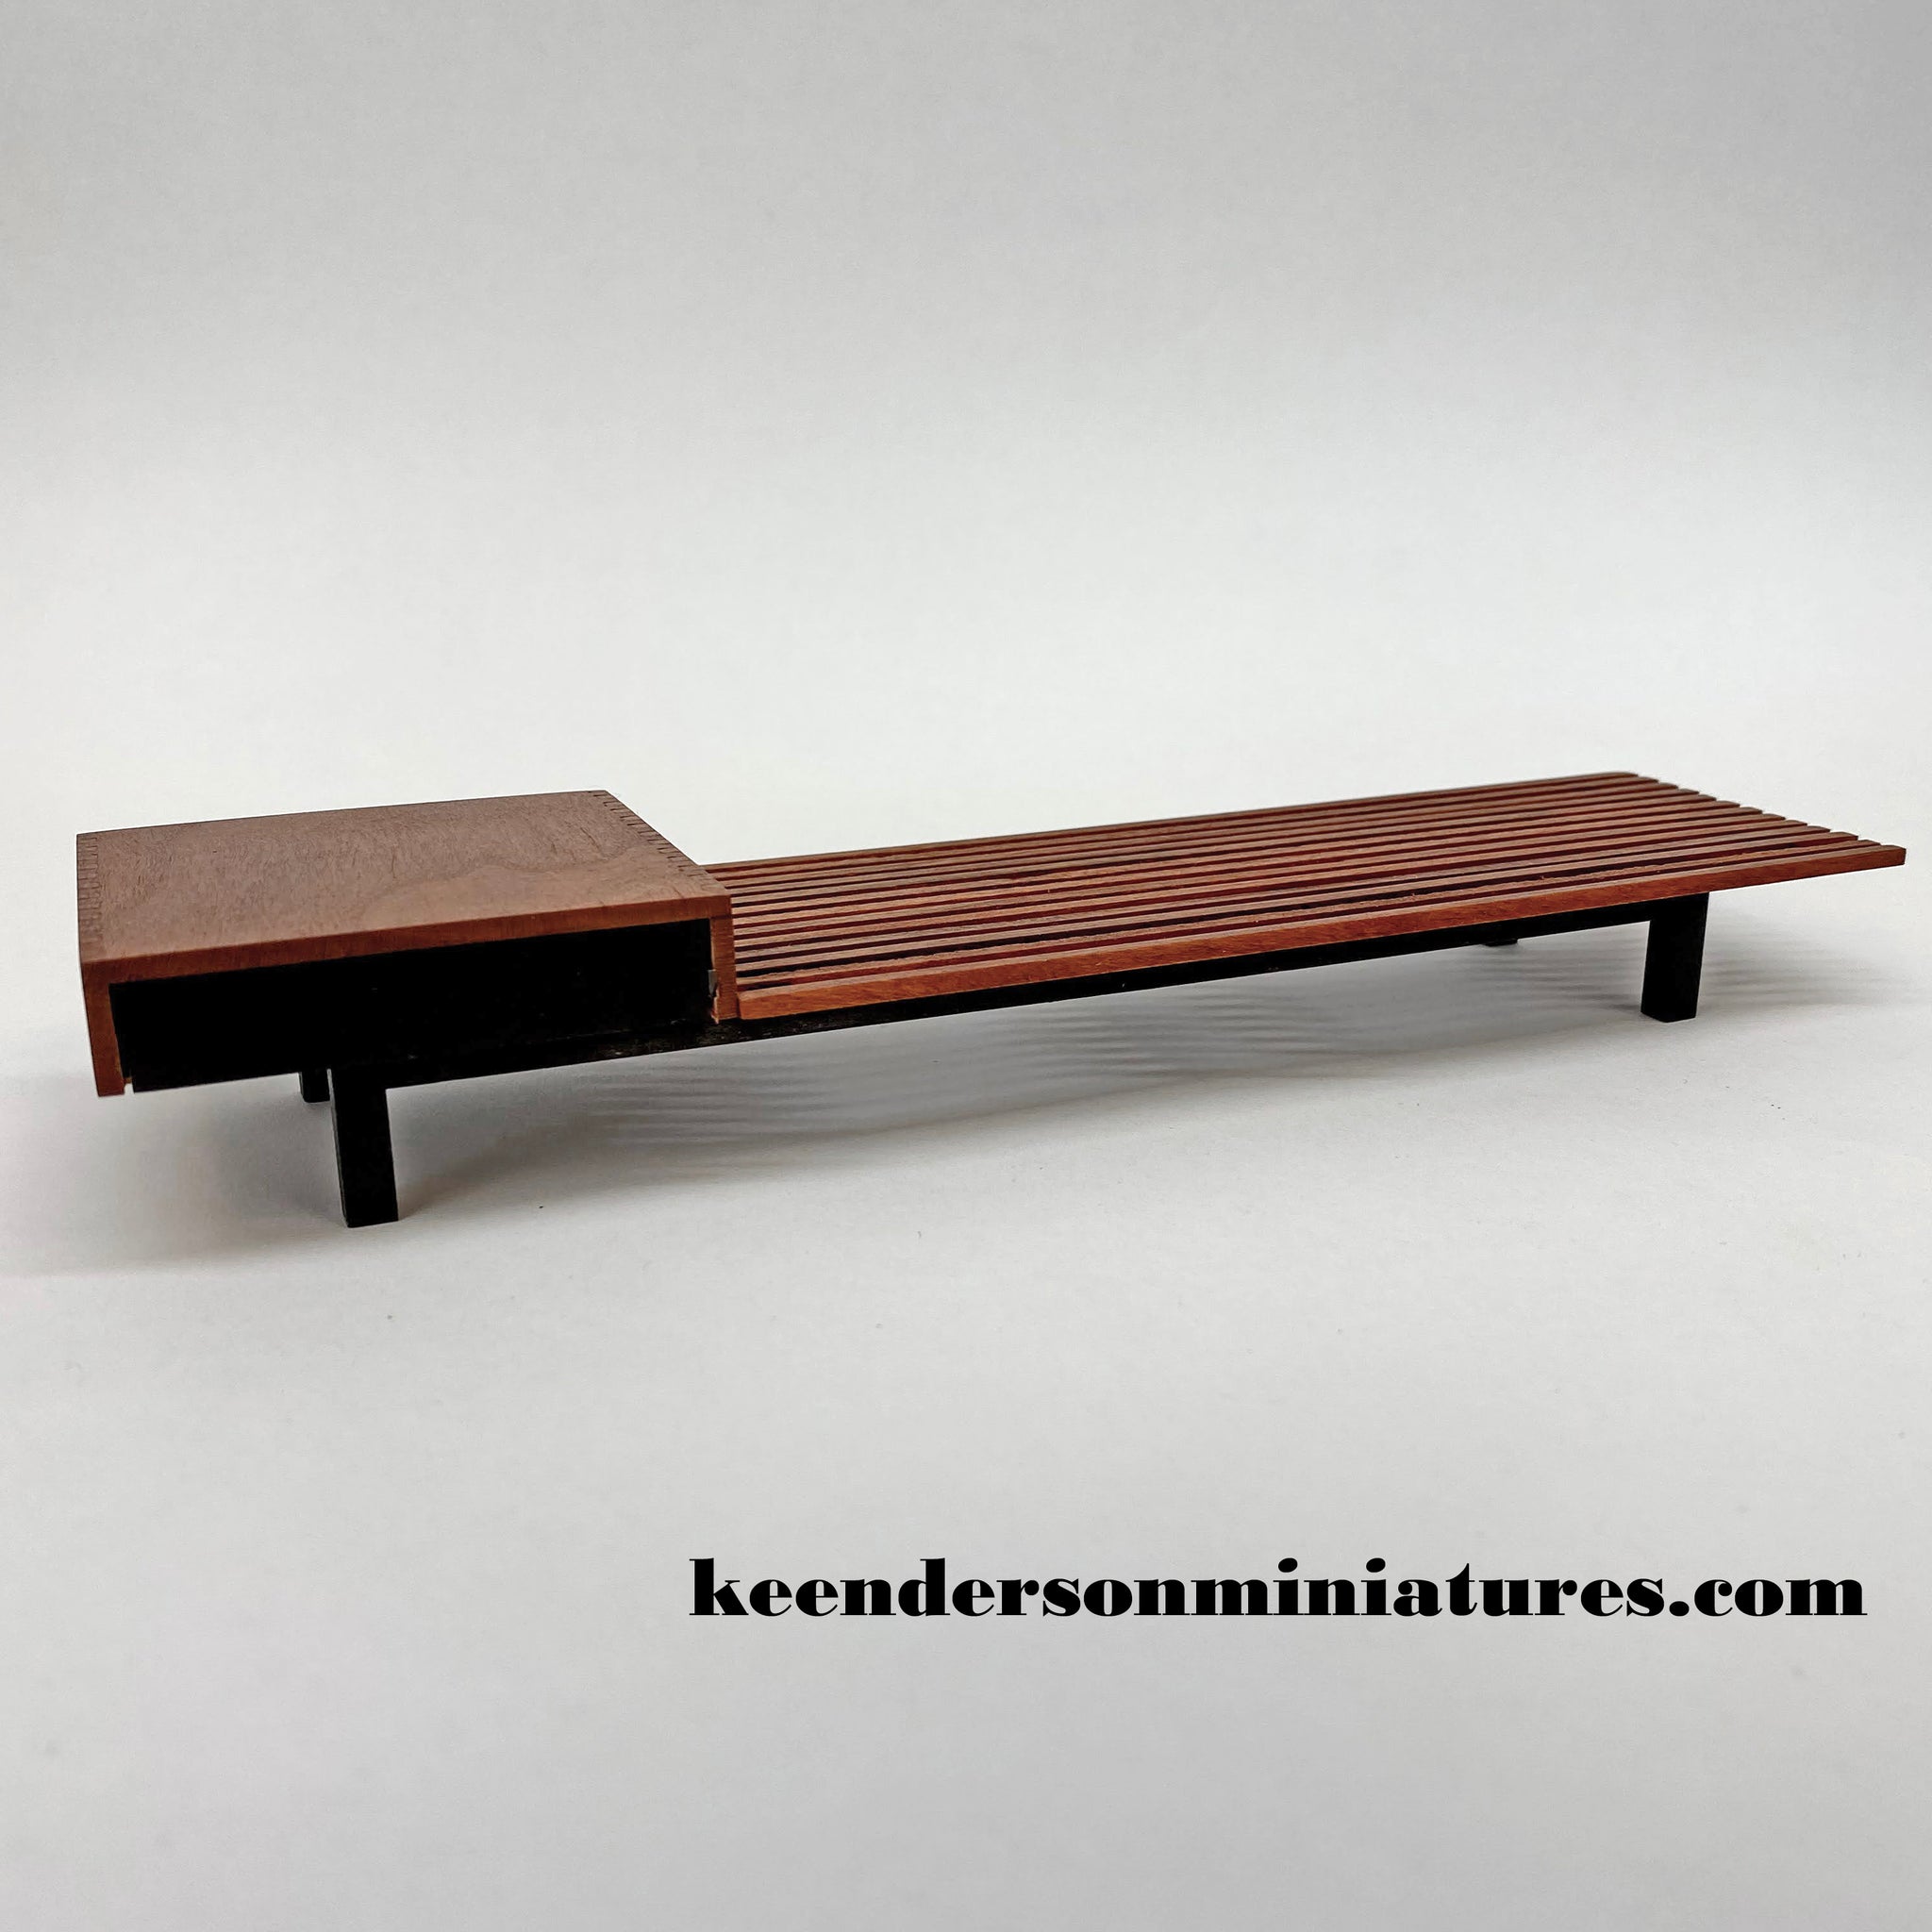 Charlotte Perriand Cansado Bench – Keenderson Miniatures